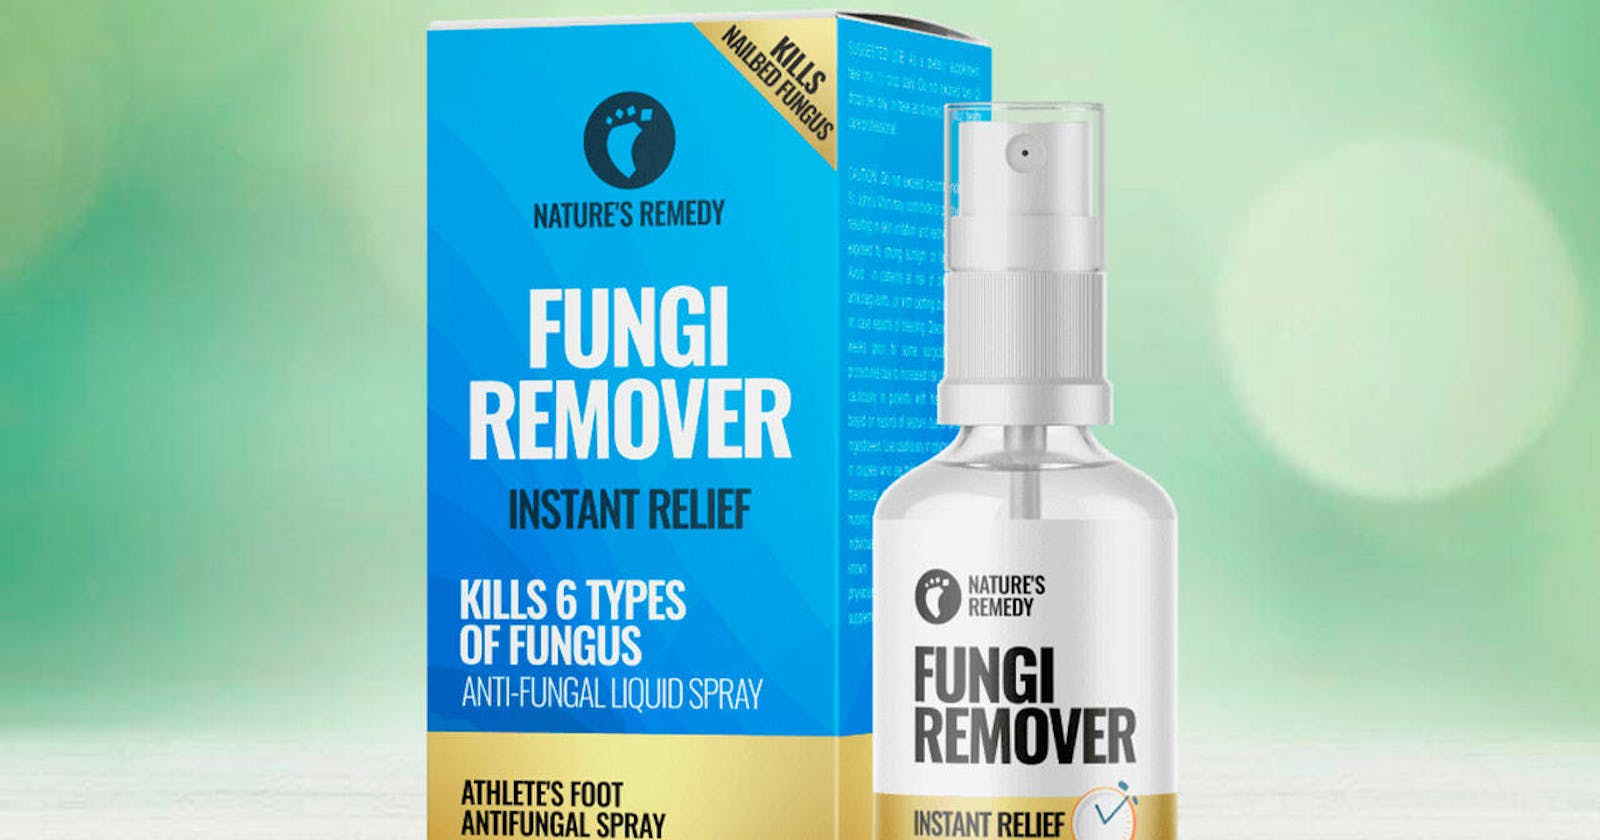 Nature's Remedy Fungi Remover New Zealand  REVIEWS DOES IT REALLY WORK? THE TRUTH